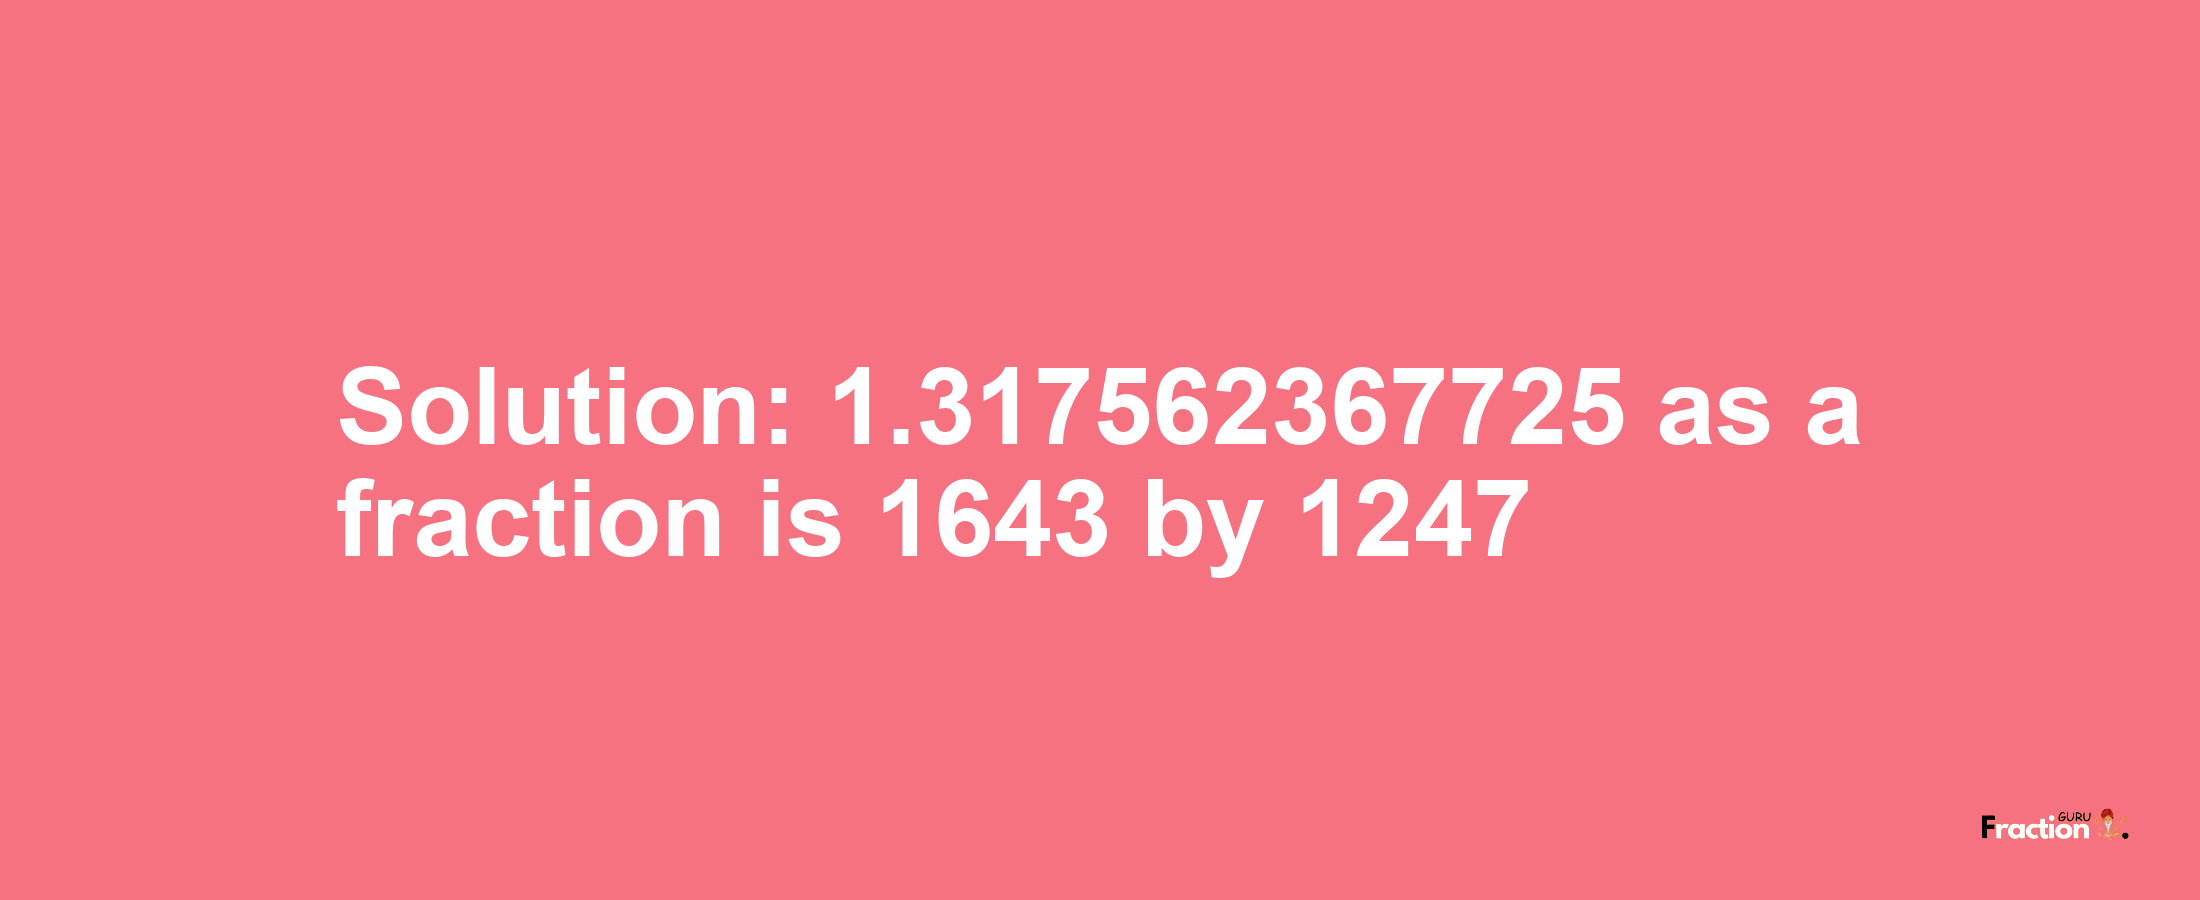 Solution:1.317562367725 as a fraction is 1643/1247